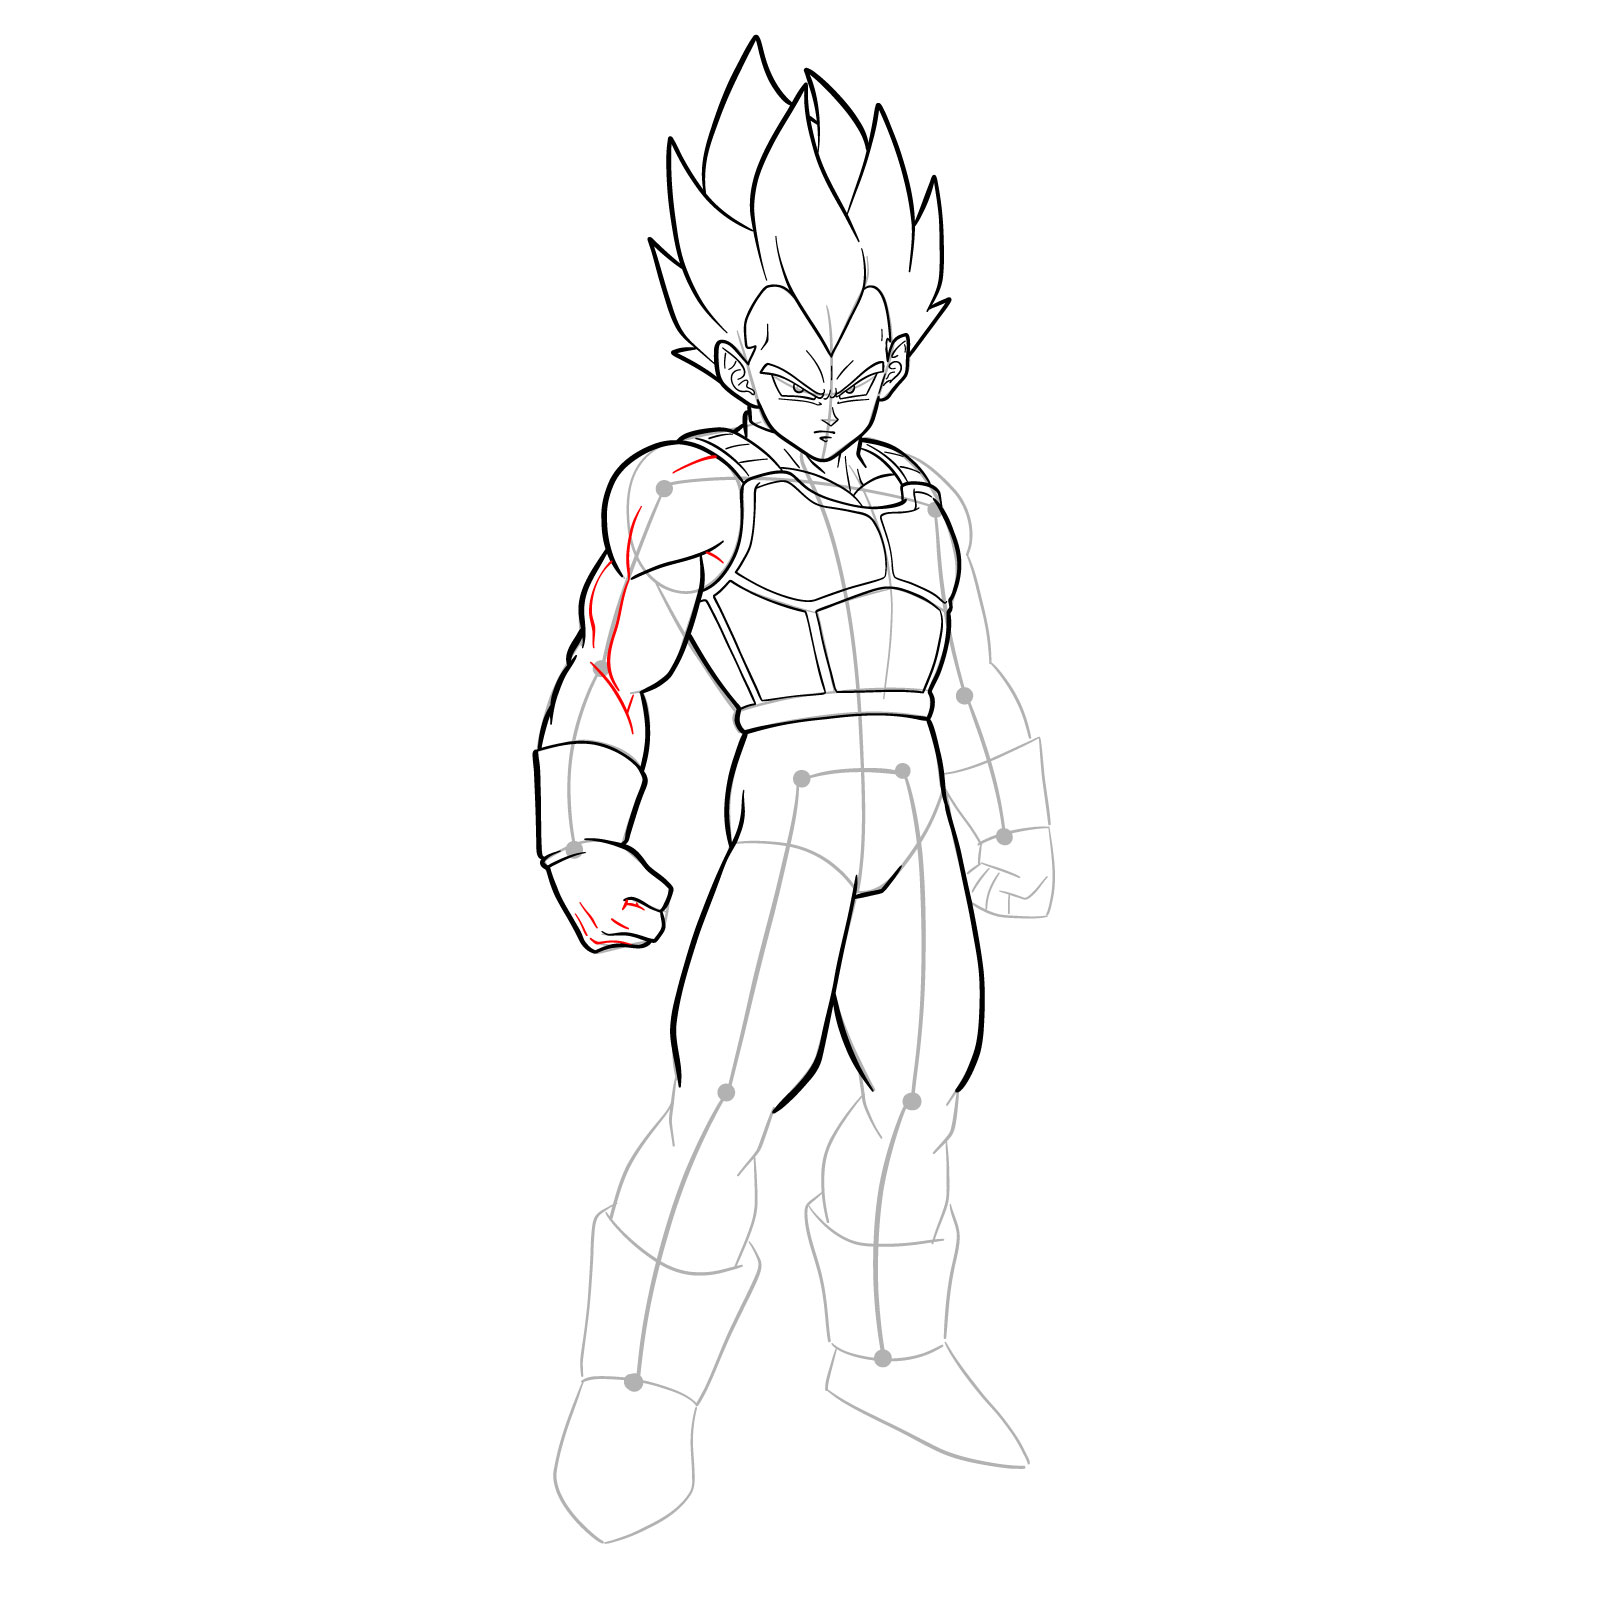 How to draw Vegeta in SSGSS - step 30